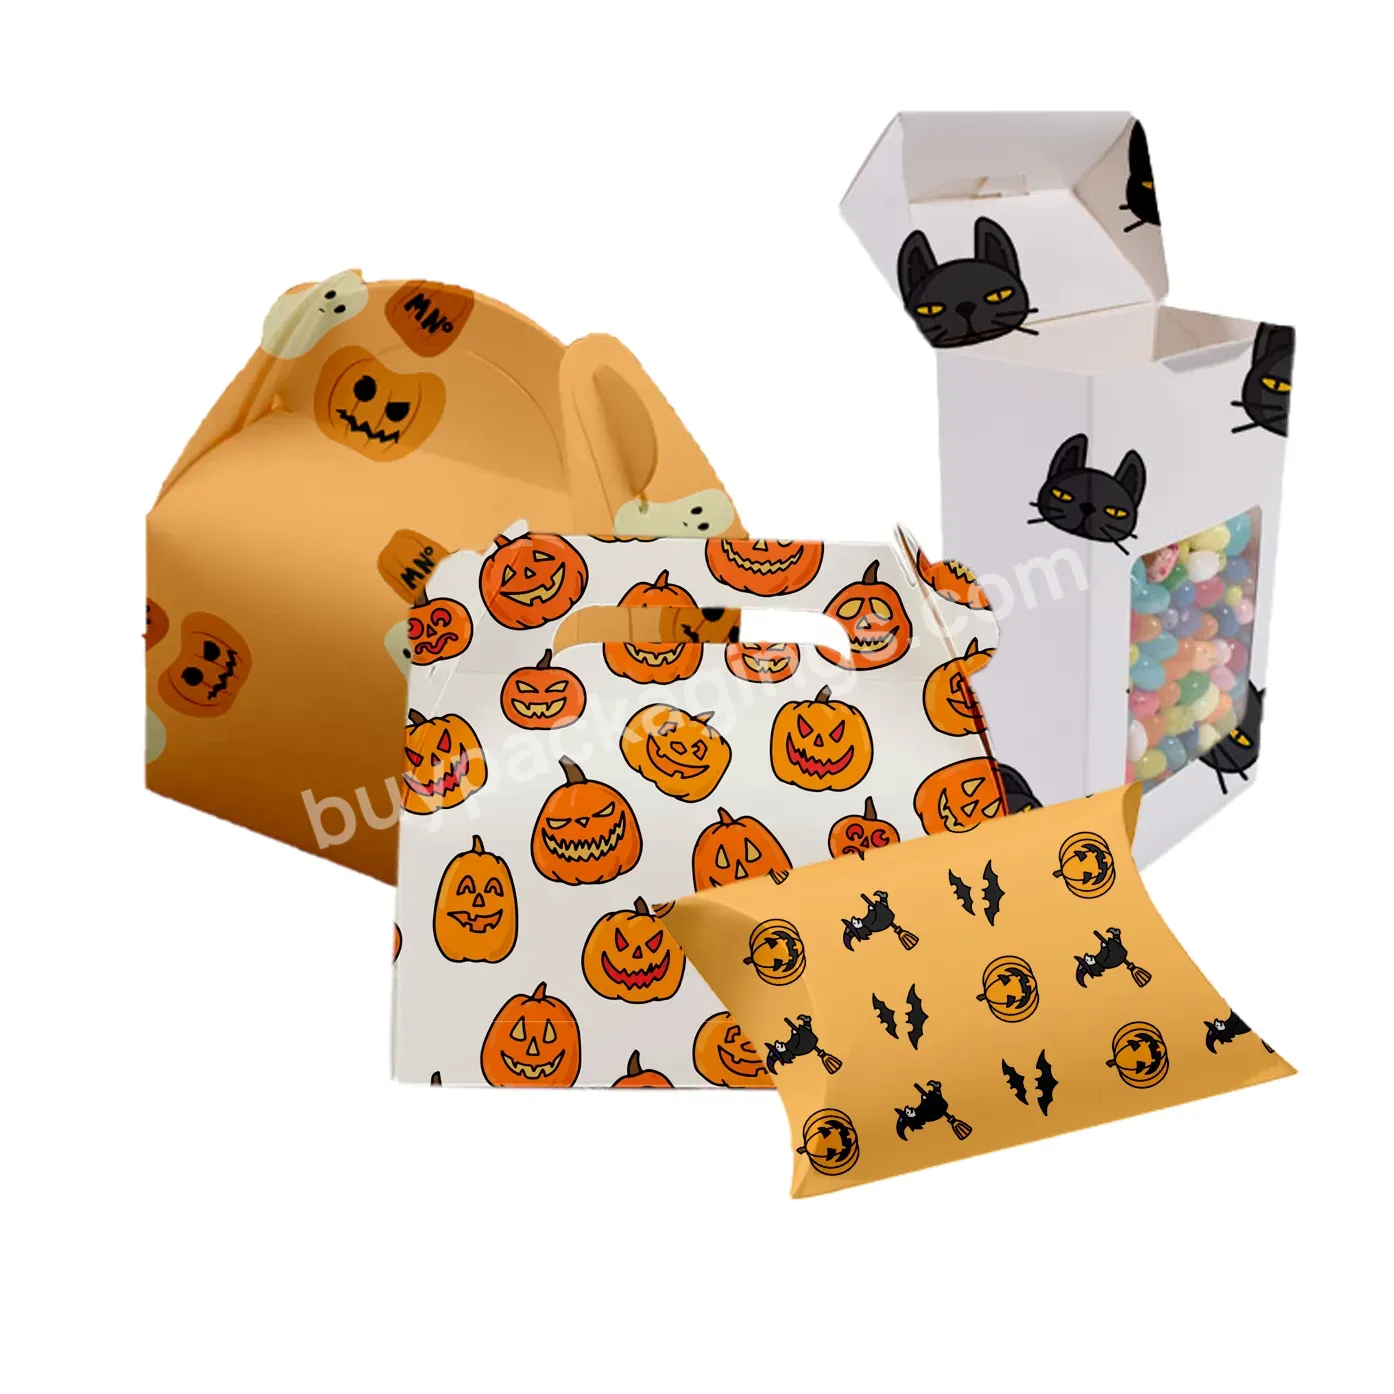 Wholesale Price Happy Halloween Mini Paper Party Snack Cooki Chocolate Candy Sweet Gift Box Packaging With Window